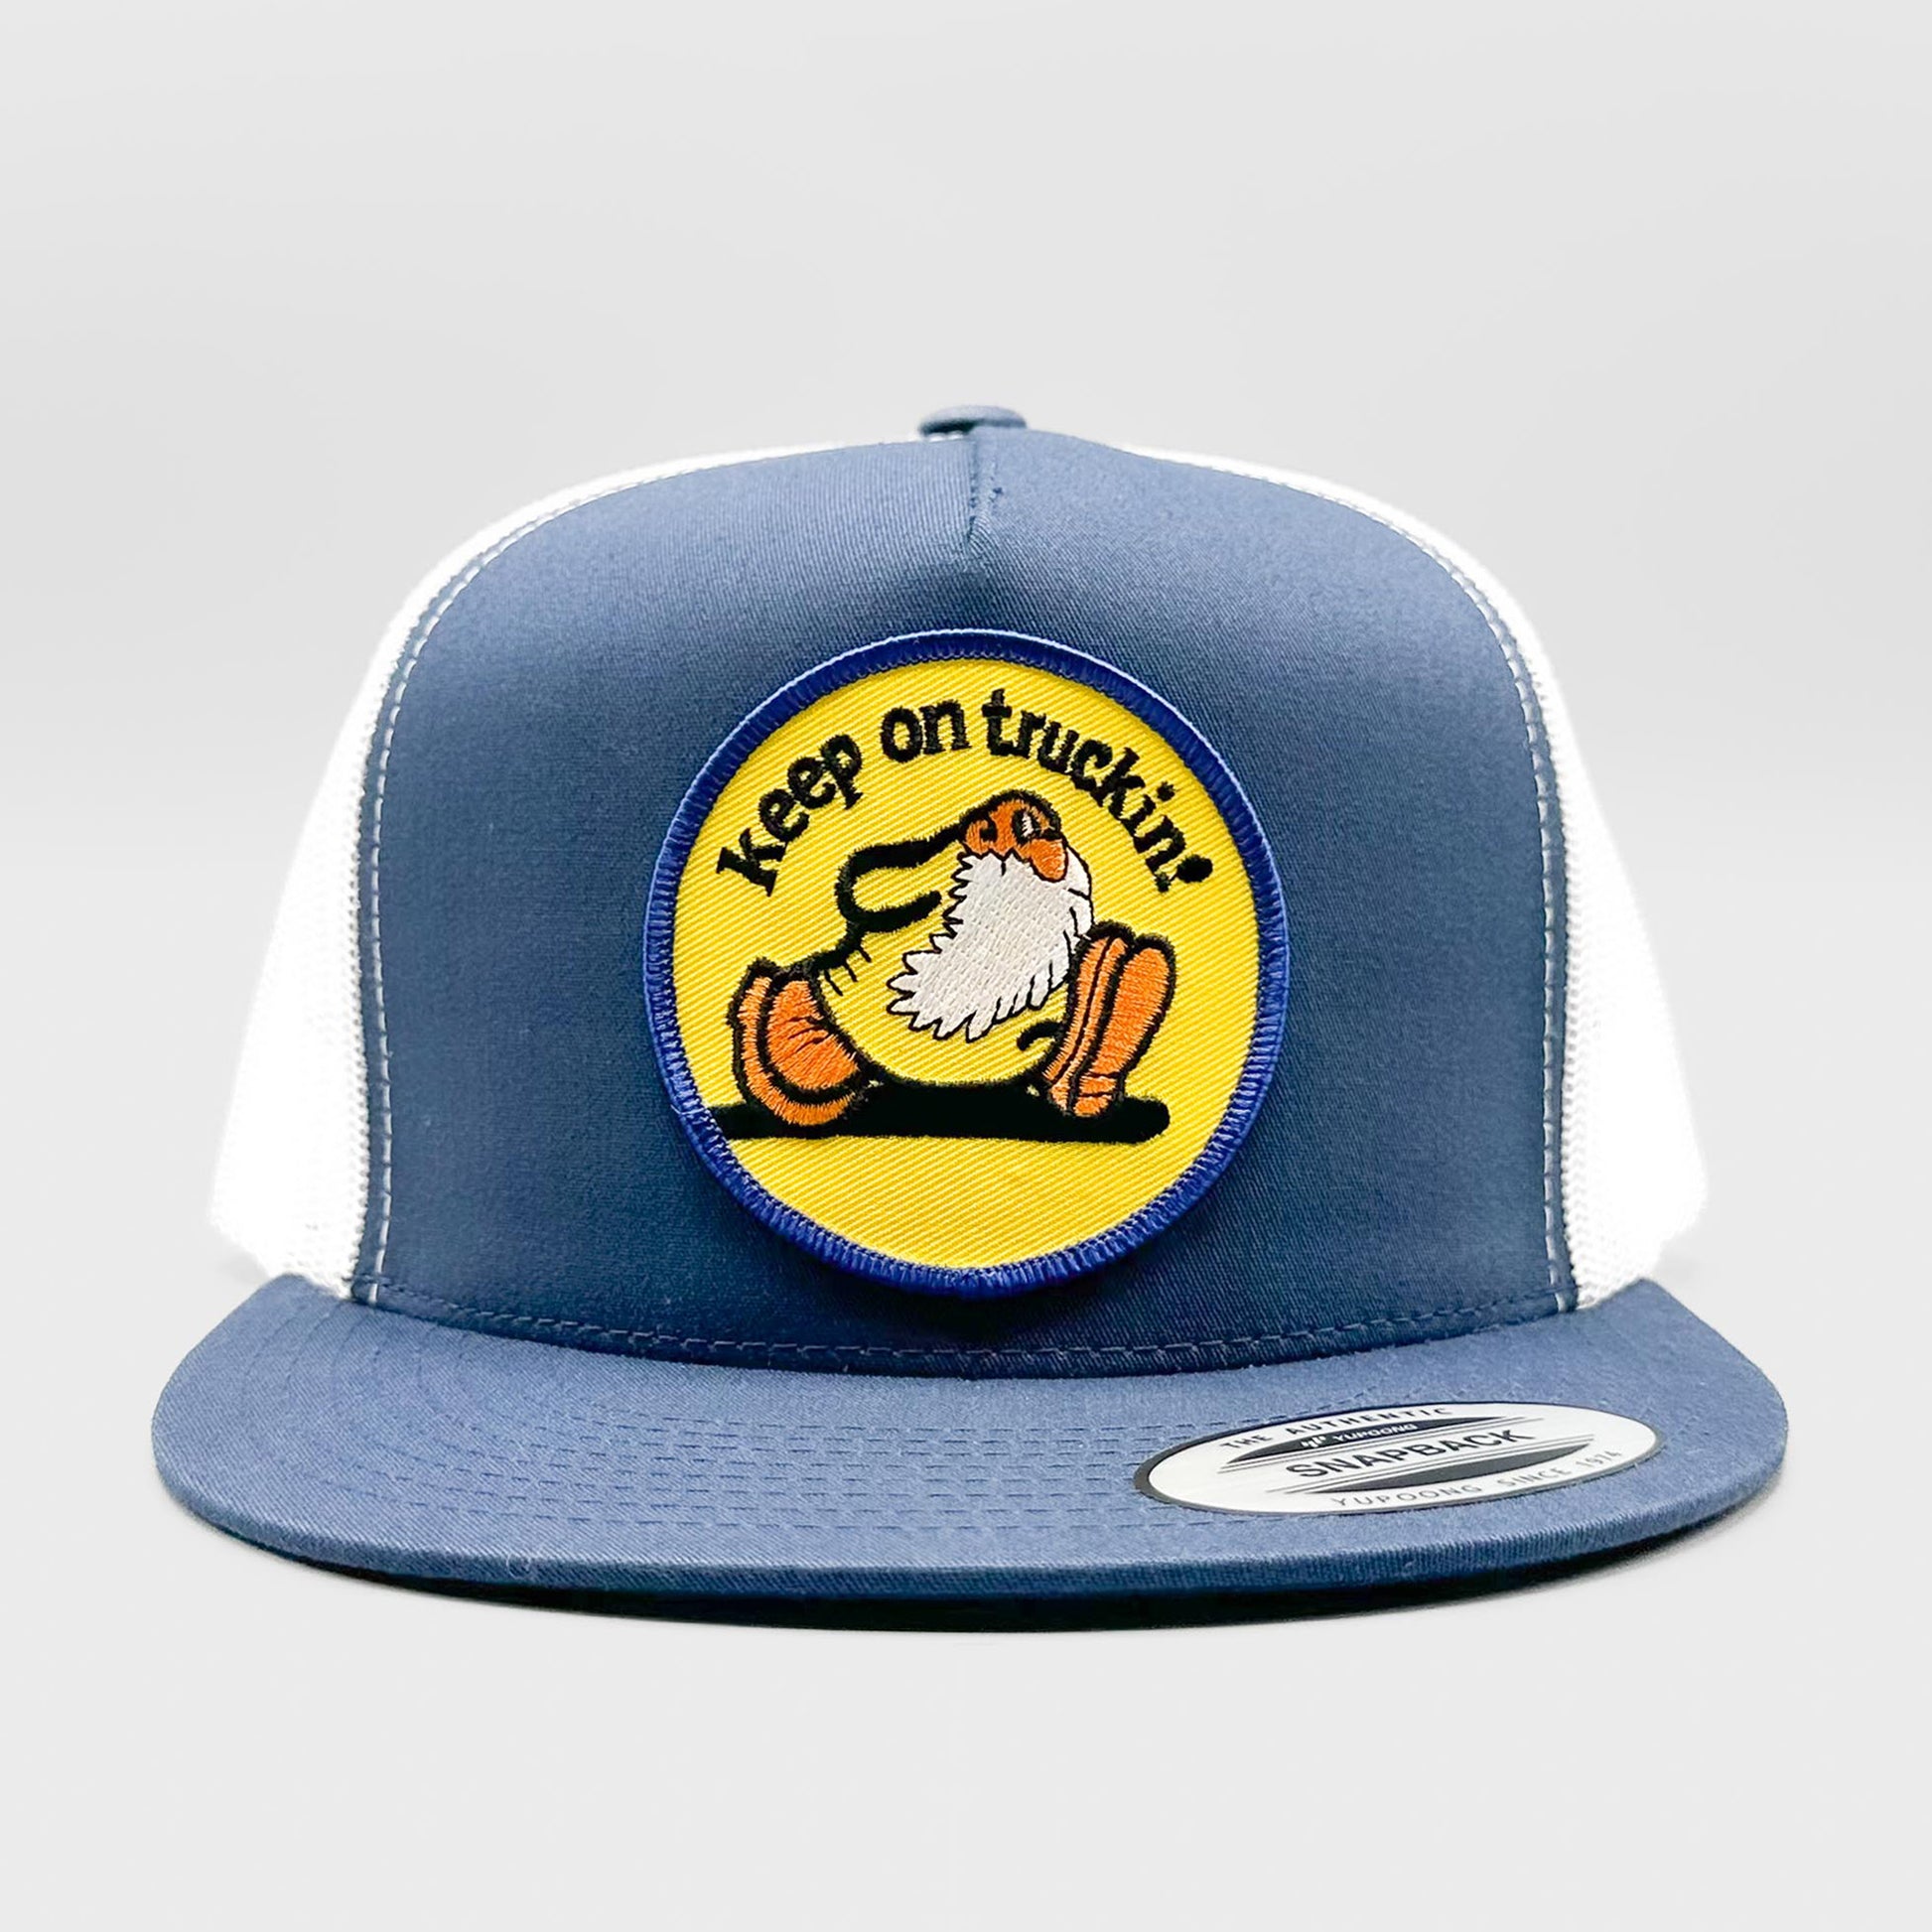 Keep On Truckin' Trucker Hat, Retro Motivational Patch On Yupoong 6006